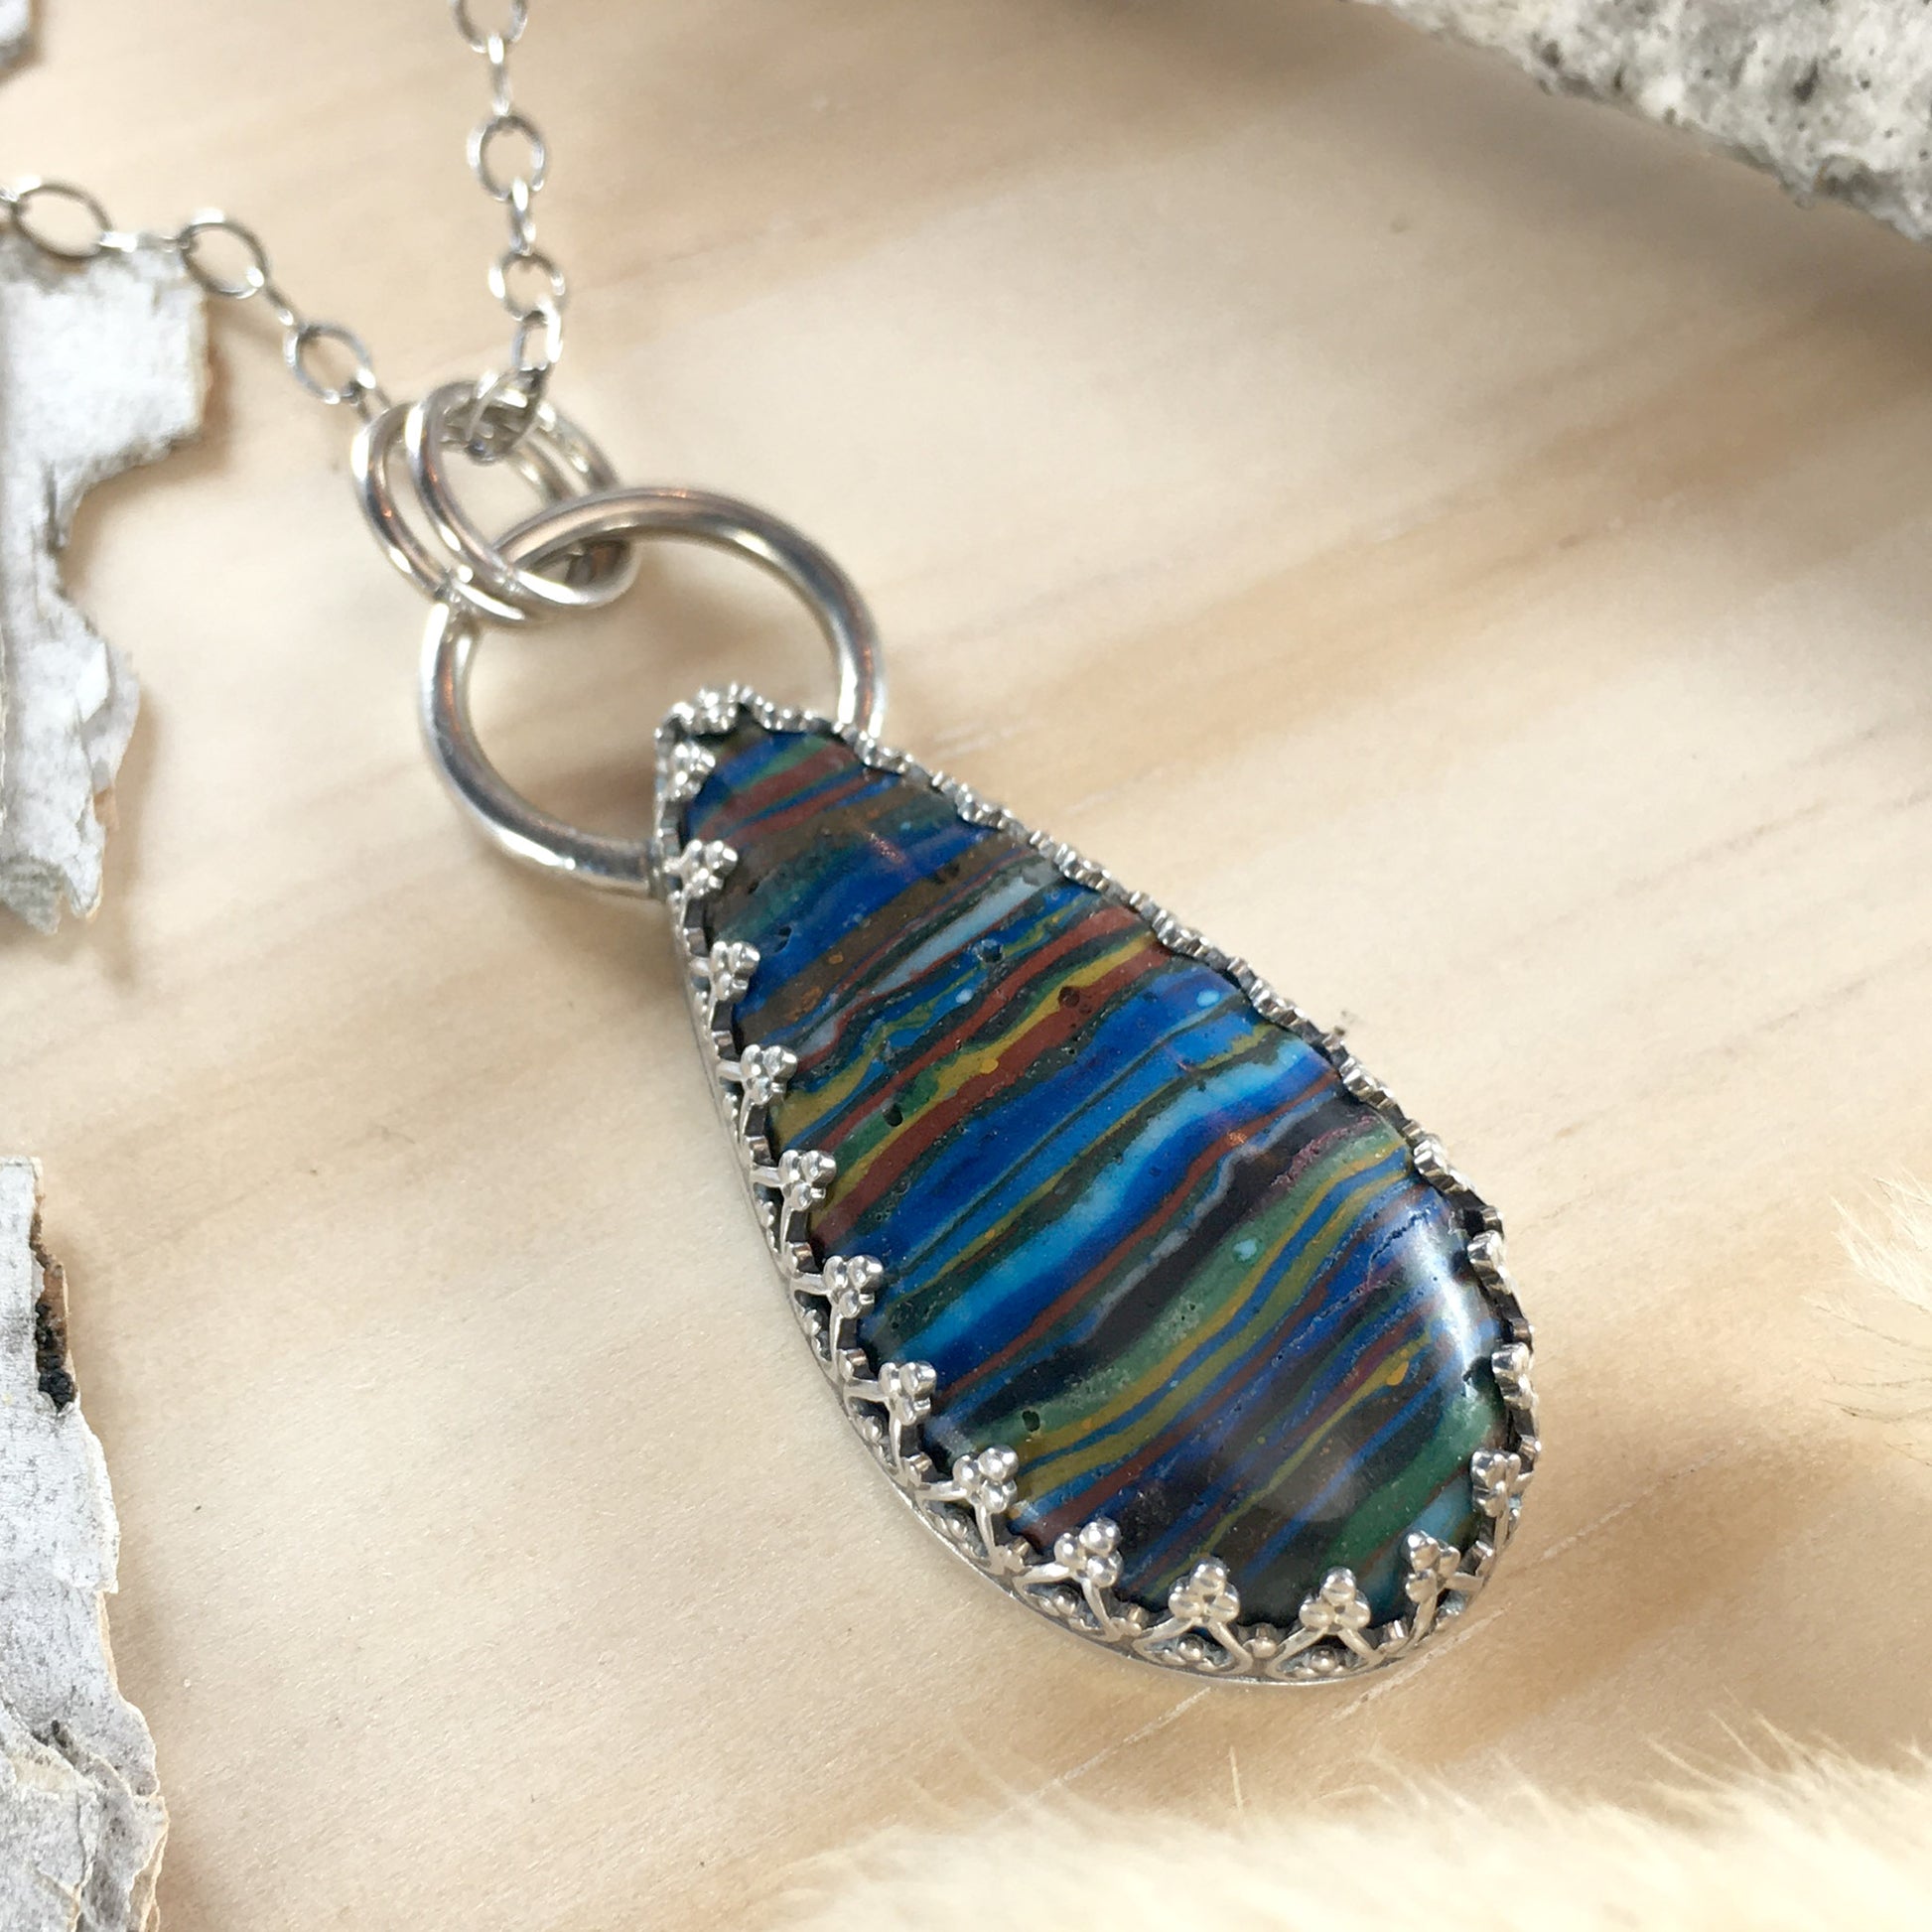 Rainbow Calsilica Pendant Necklace Front View - Stone Treasures by the Lake